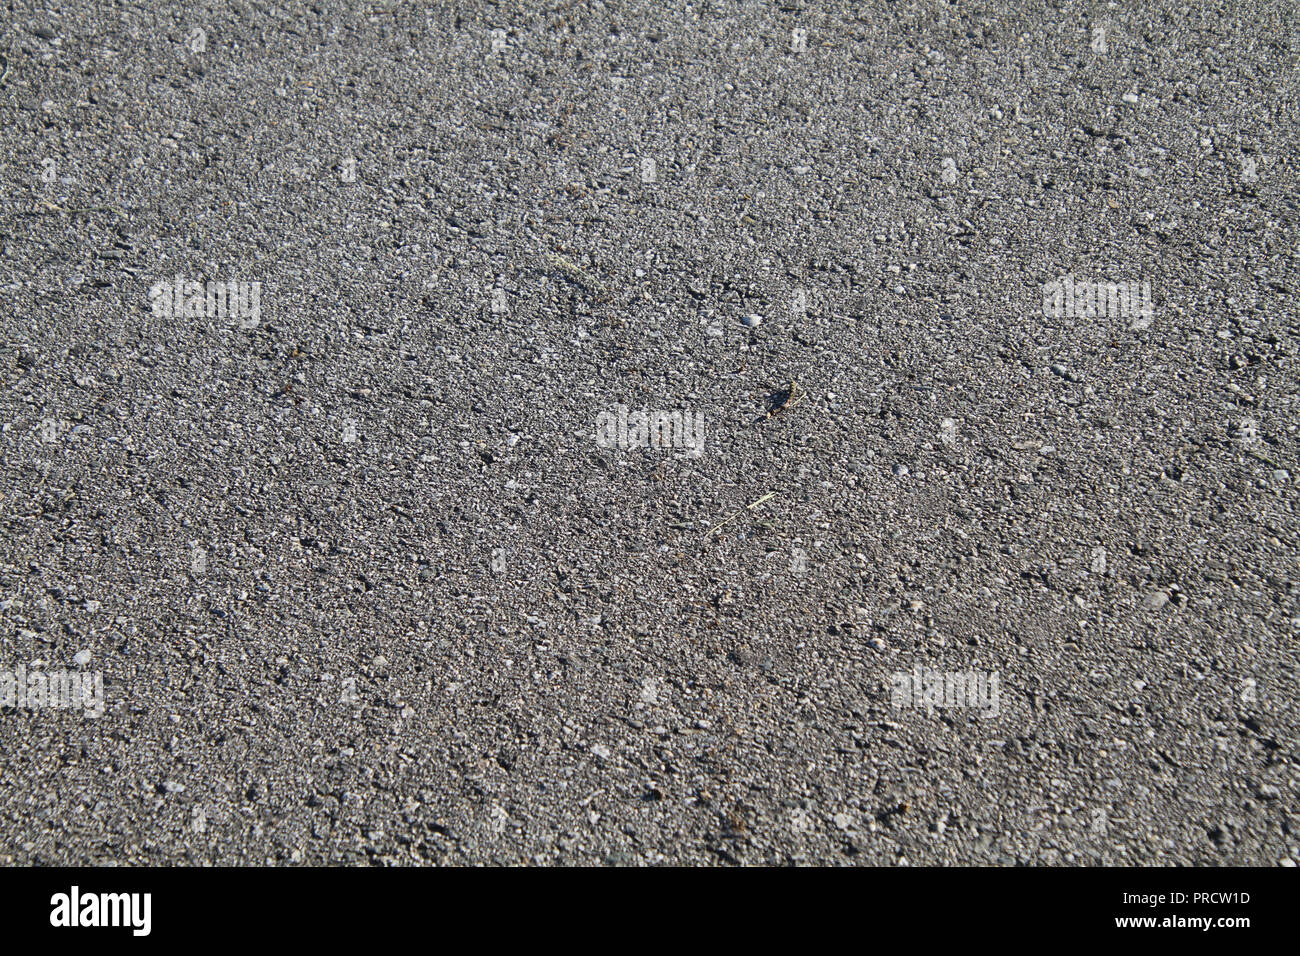 A fine gravel photo to use as a background Stock Photo